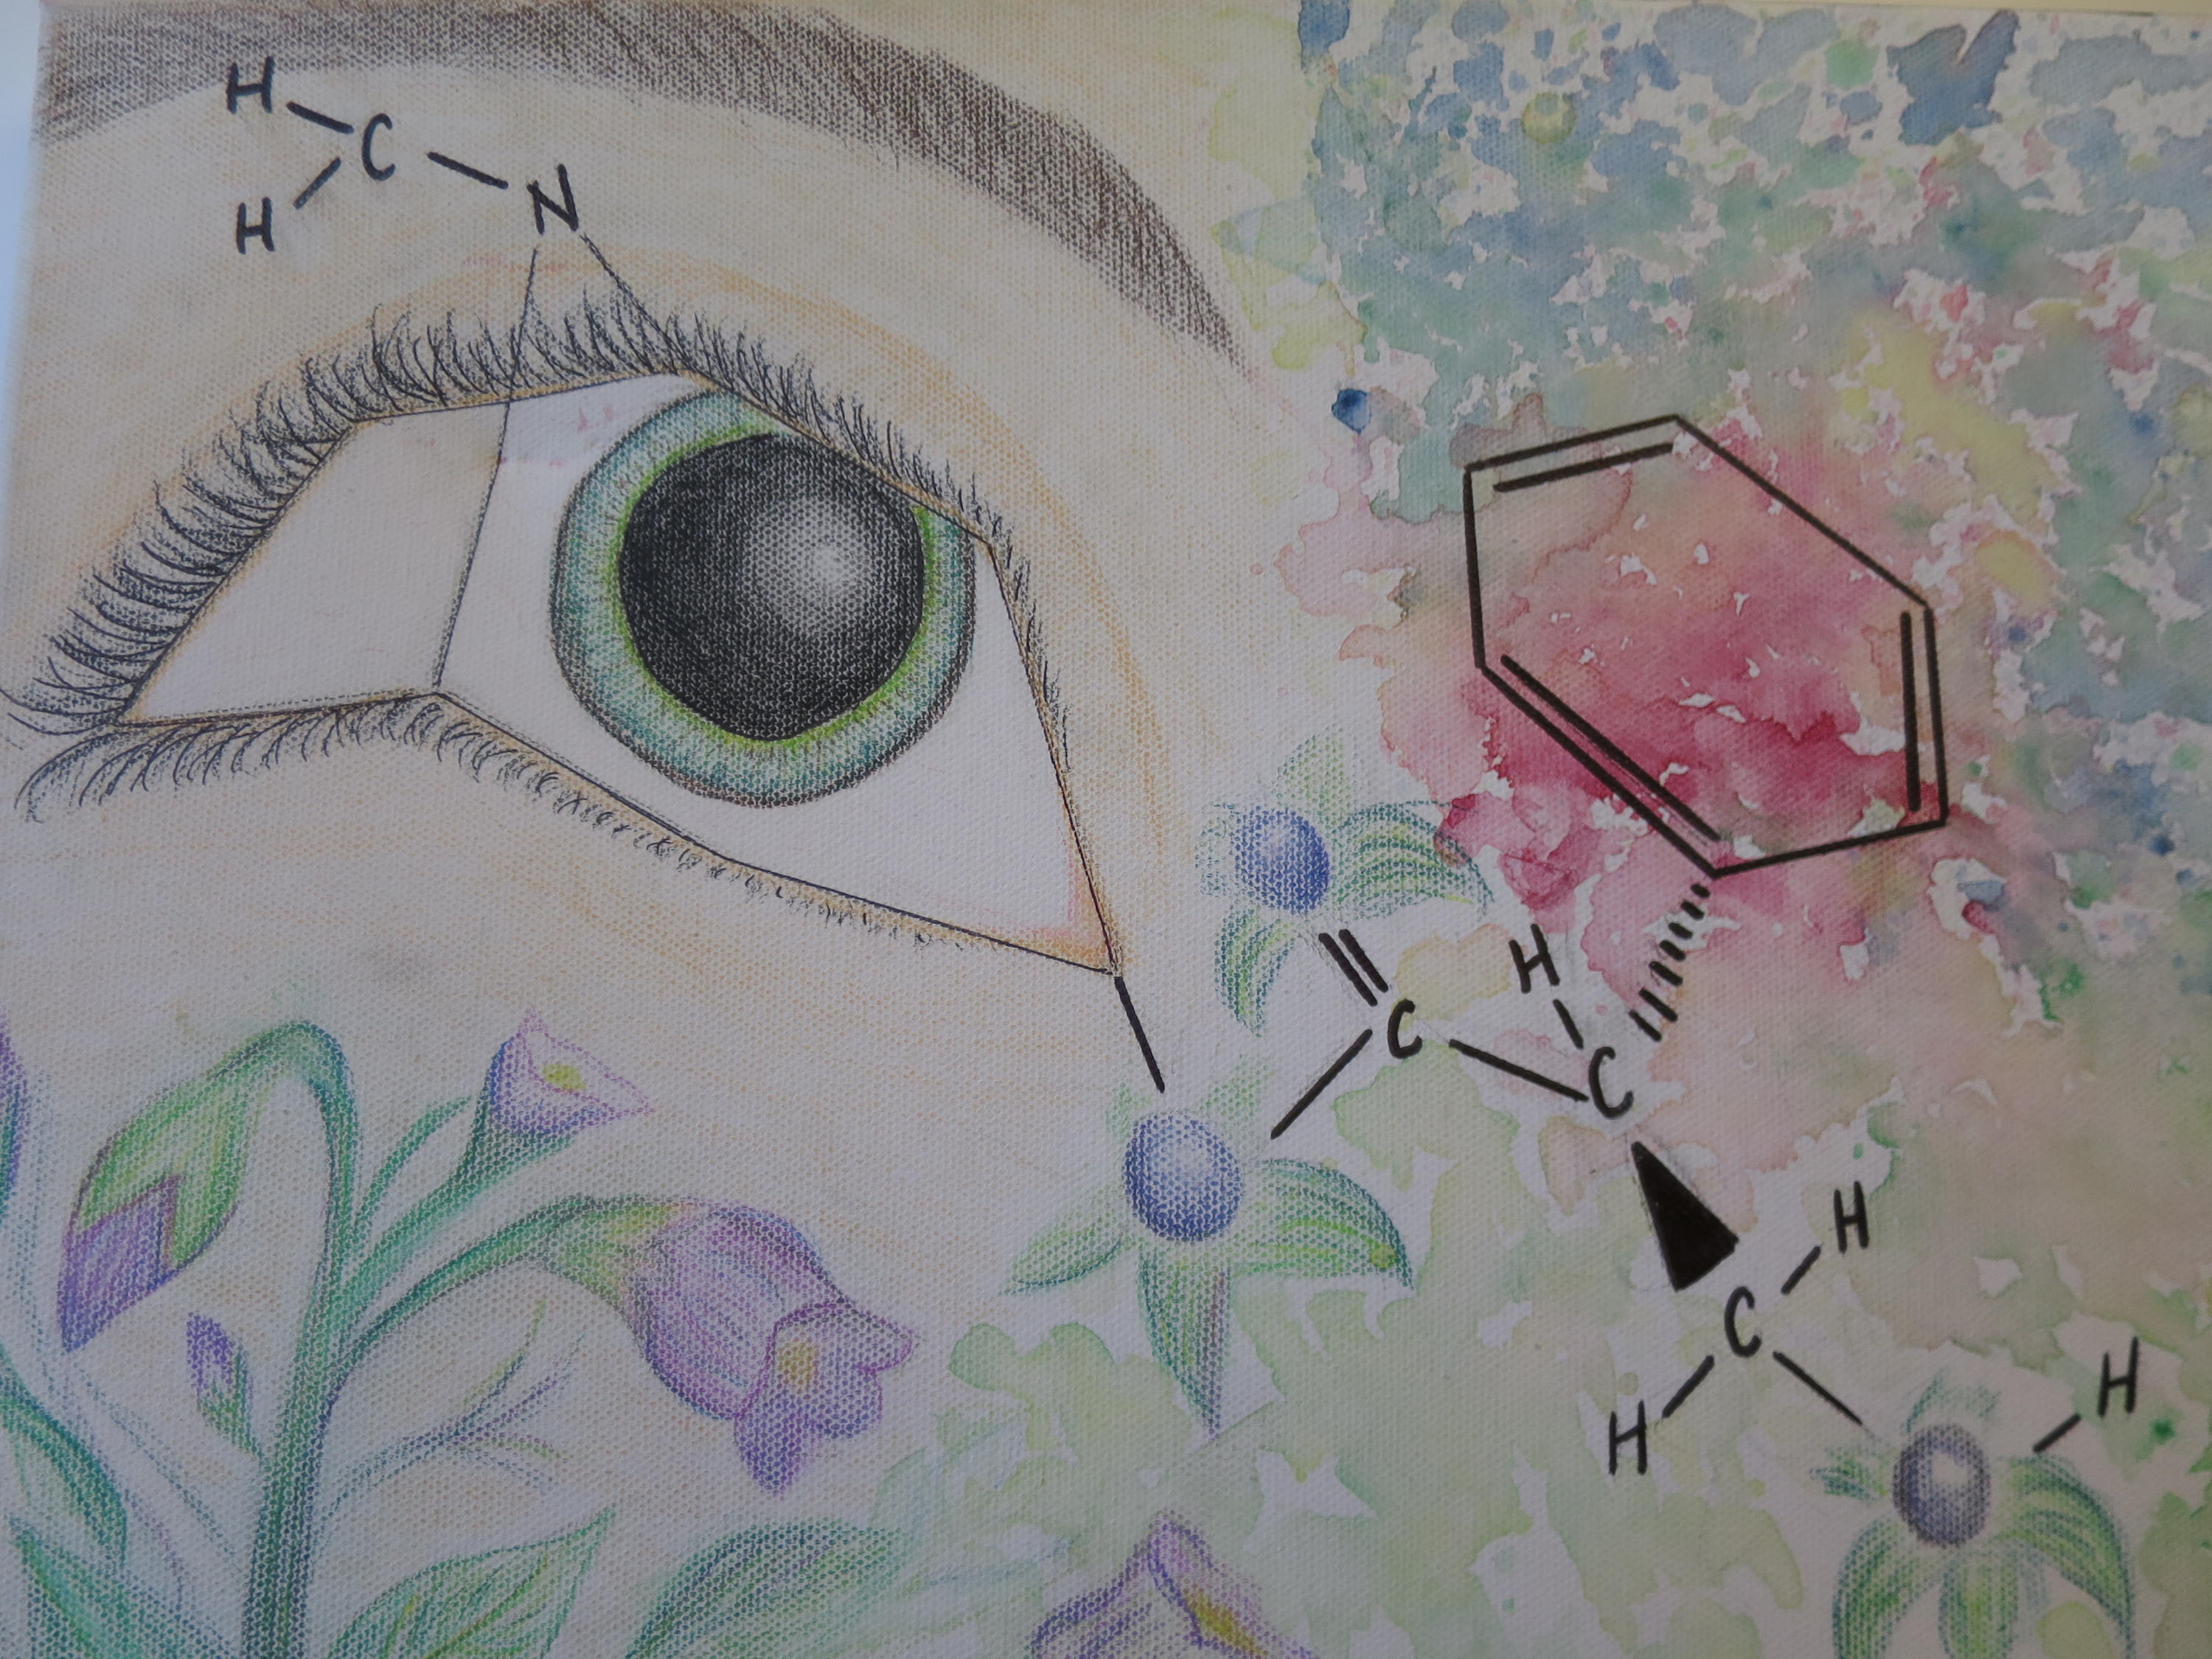 The Chemistry behind a Belladonna – a painting of an eye with an organic molecule coming out